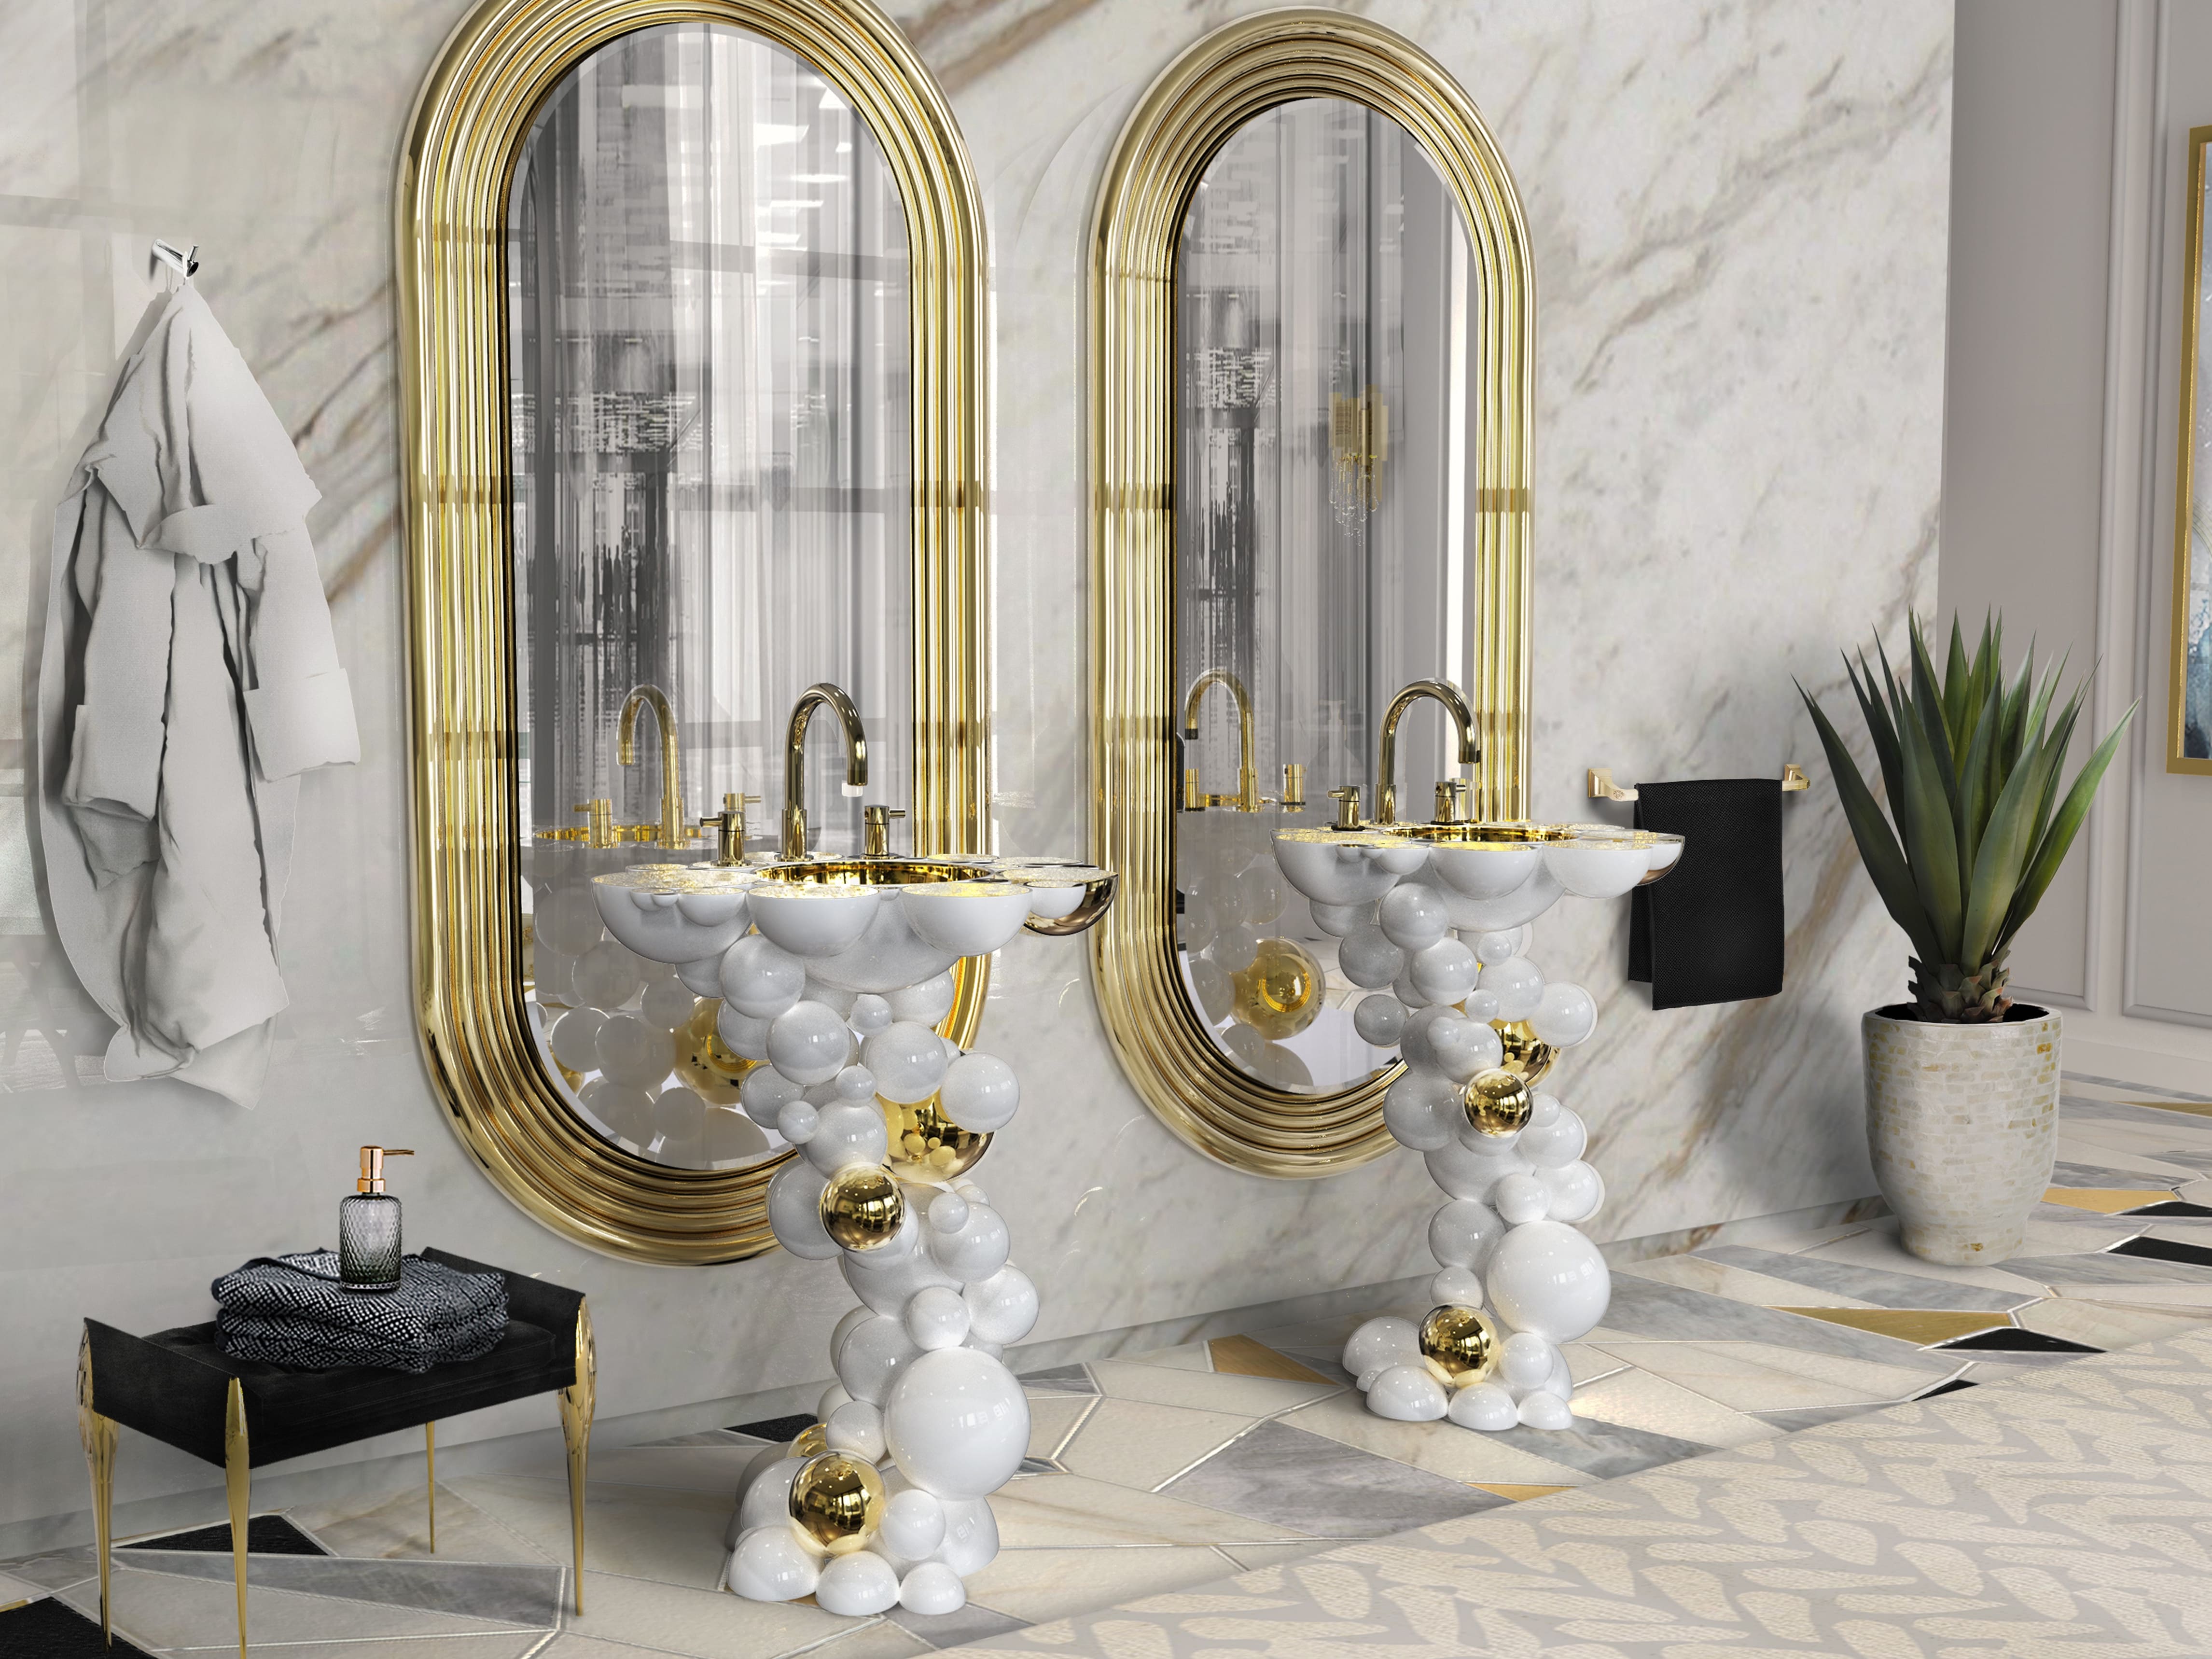 Extremelly Luxurious White Bathroom With Golden Accents And Marbled Walls - Home'Society